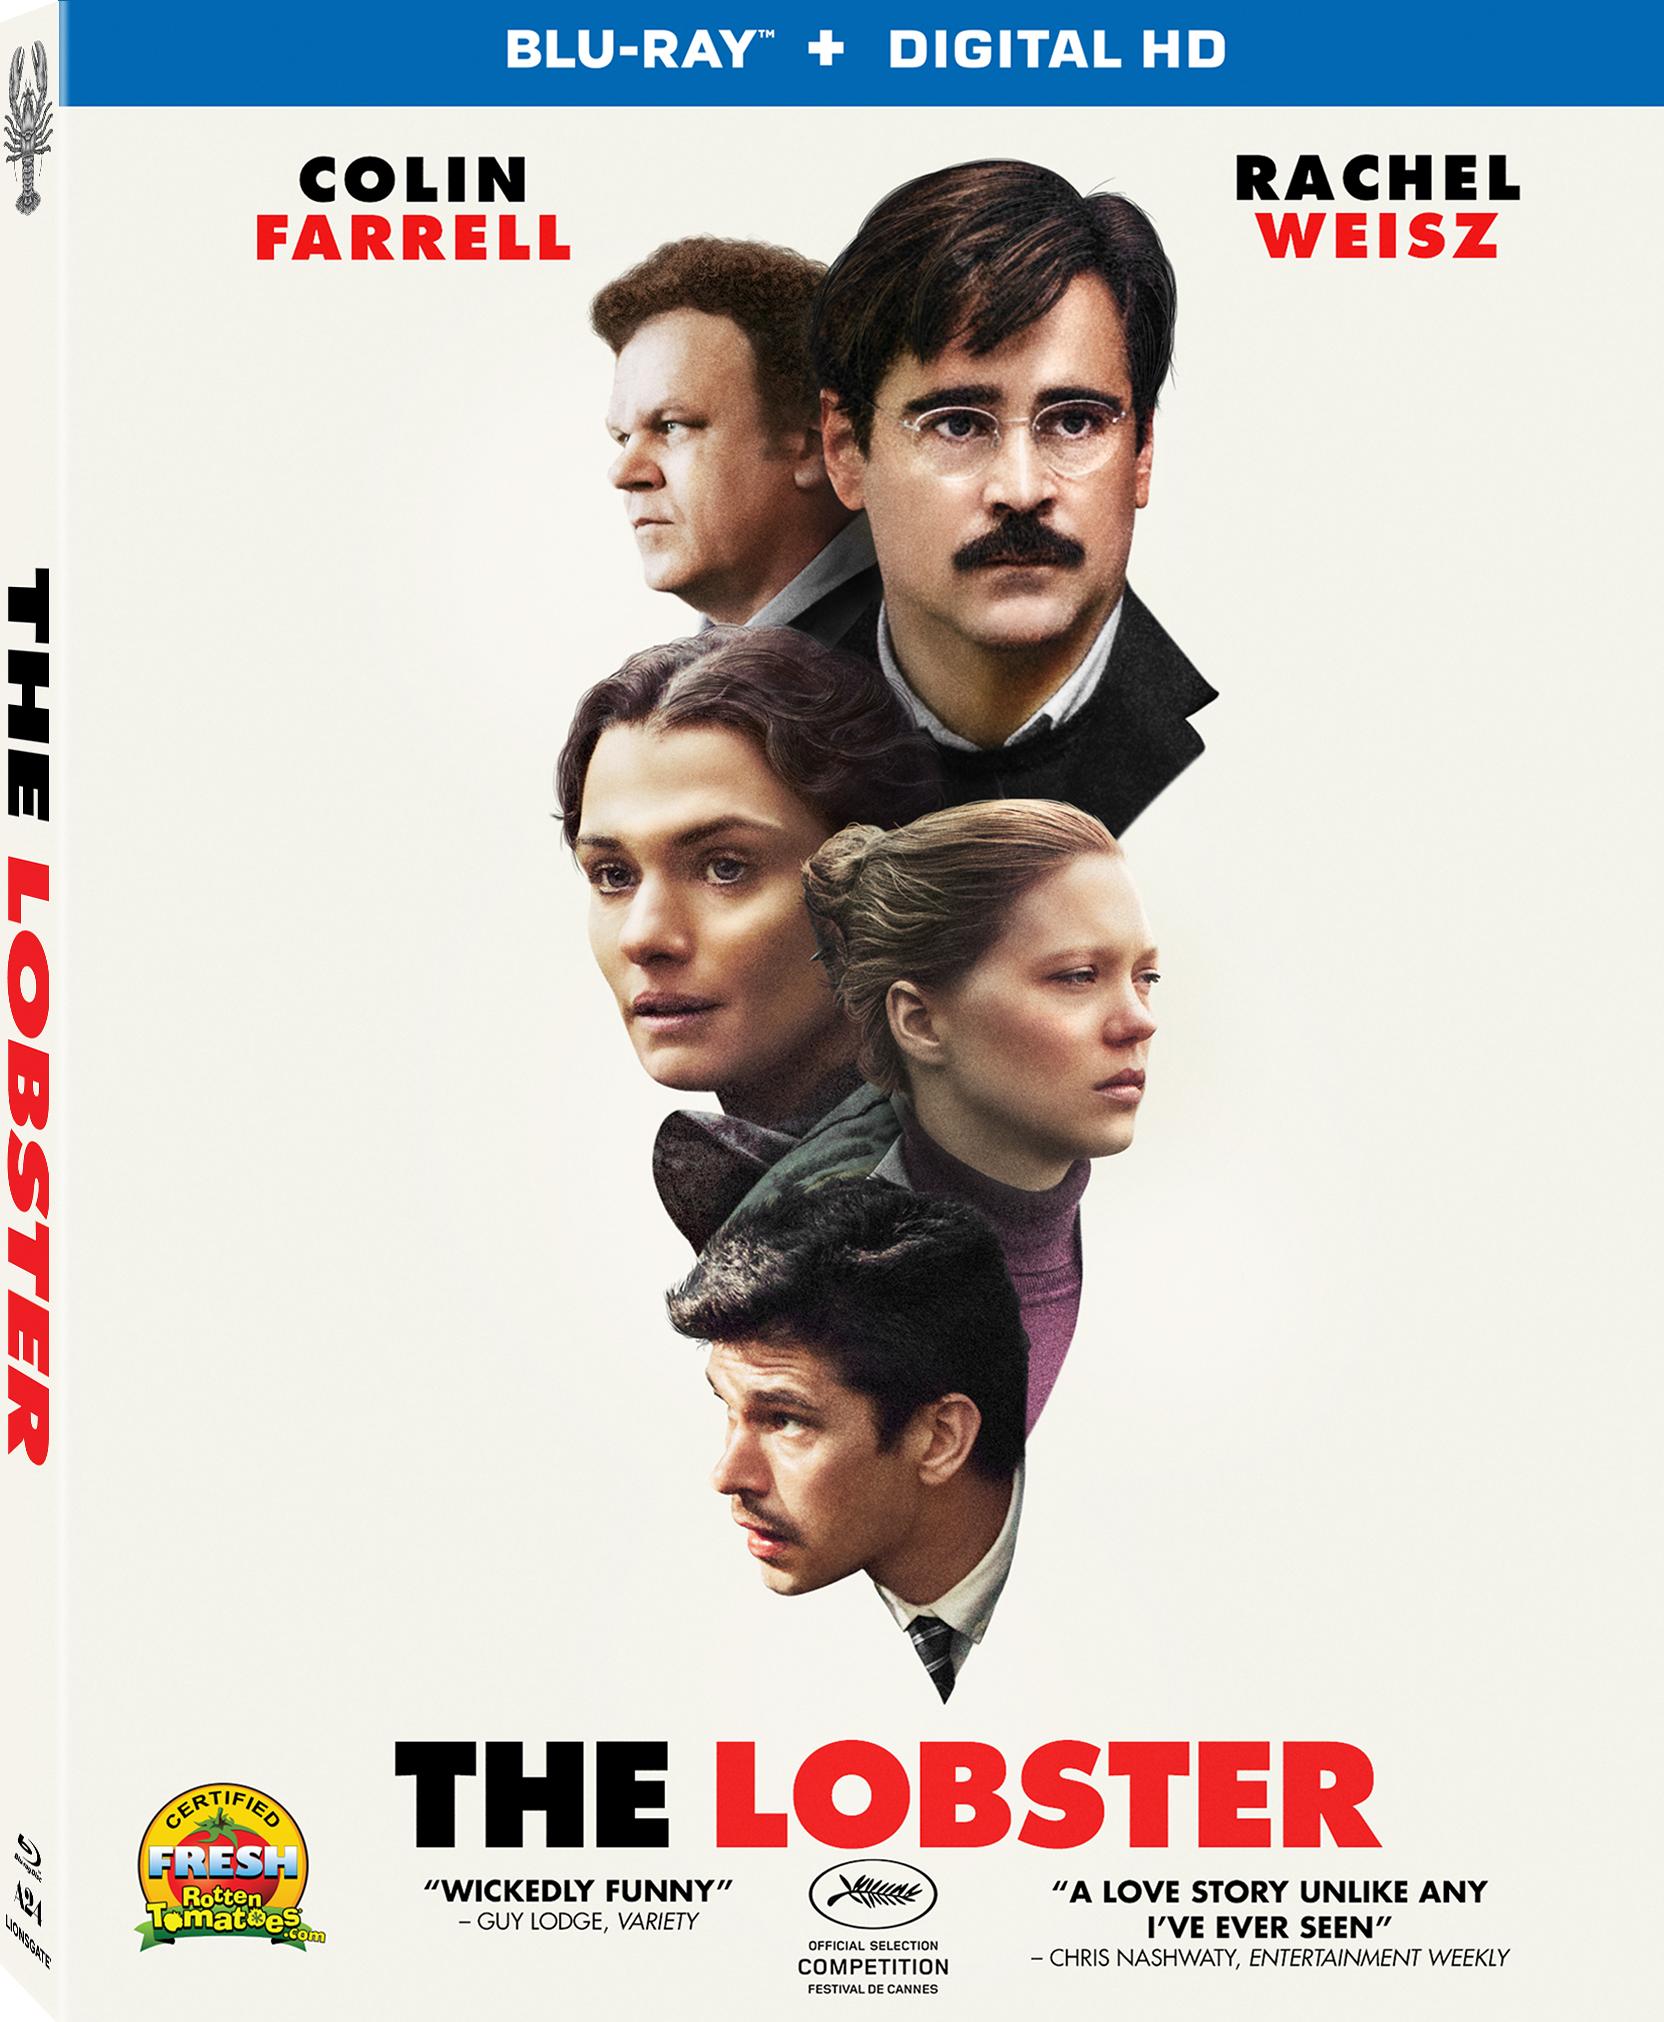 THE LOBSTER -BLU RAY + DVD-